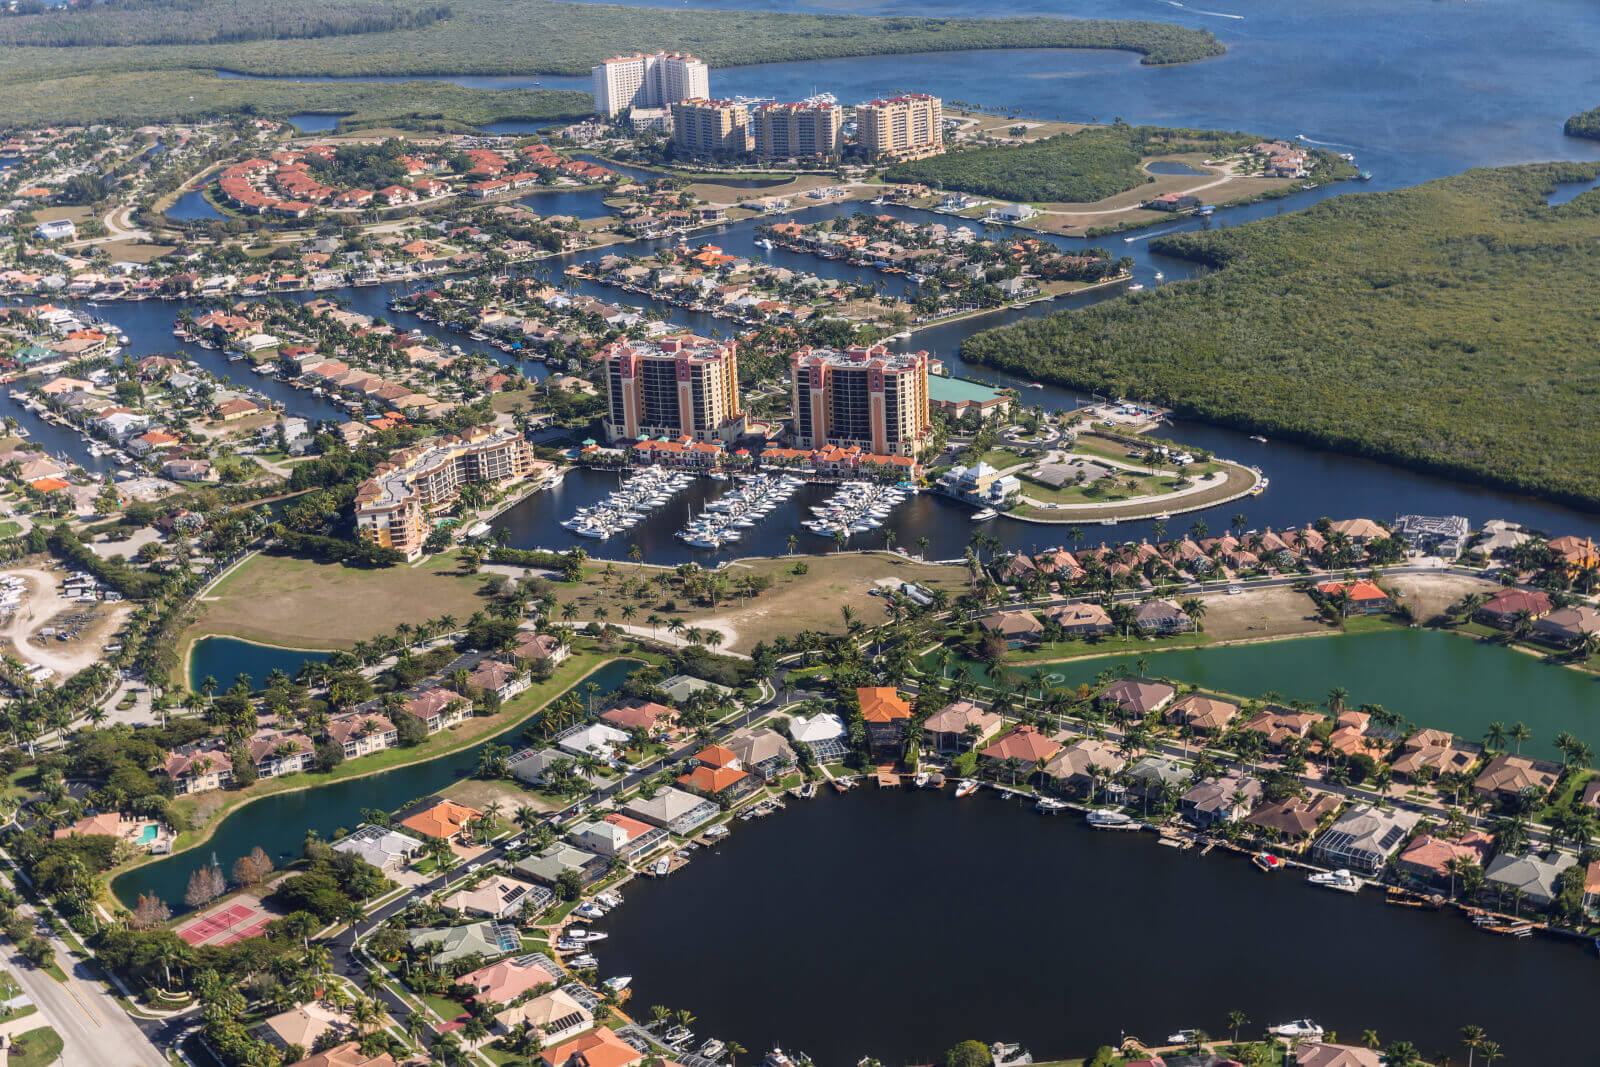 Relocation Guide 2021: Moving to Cape Coral, Florida